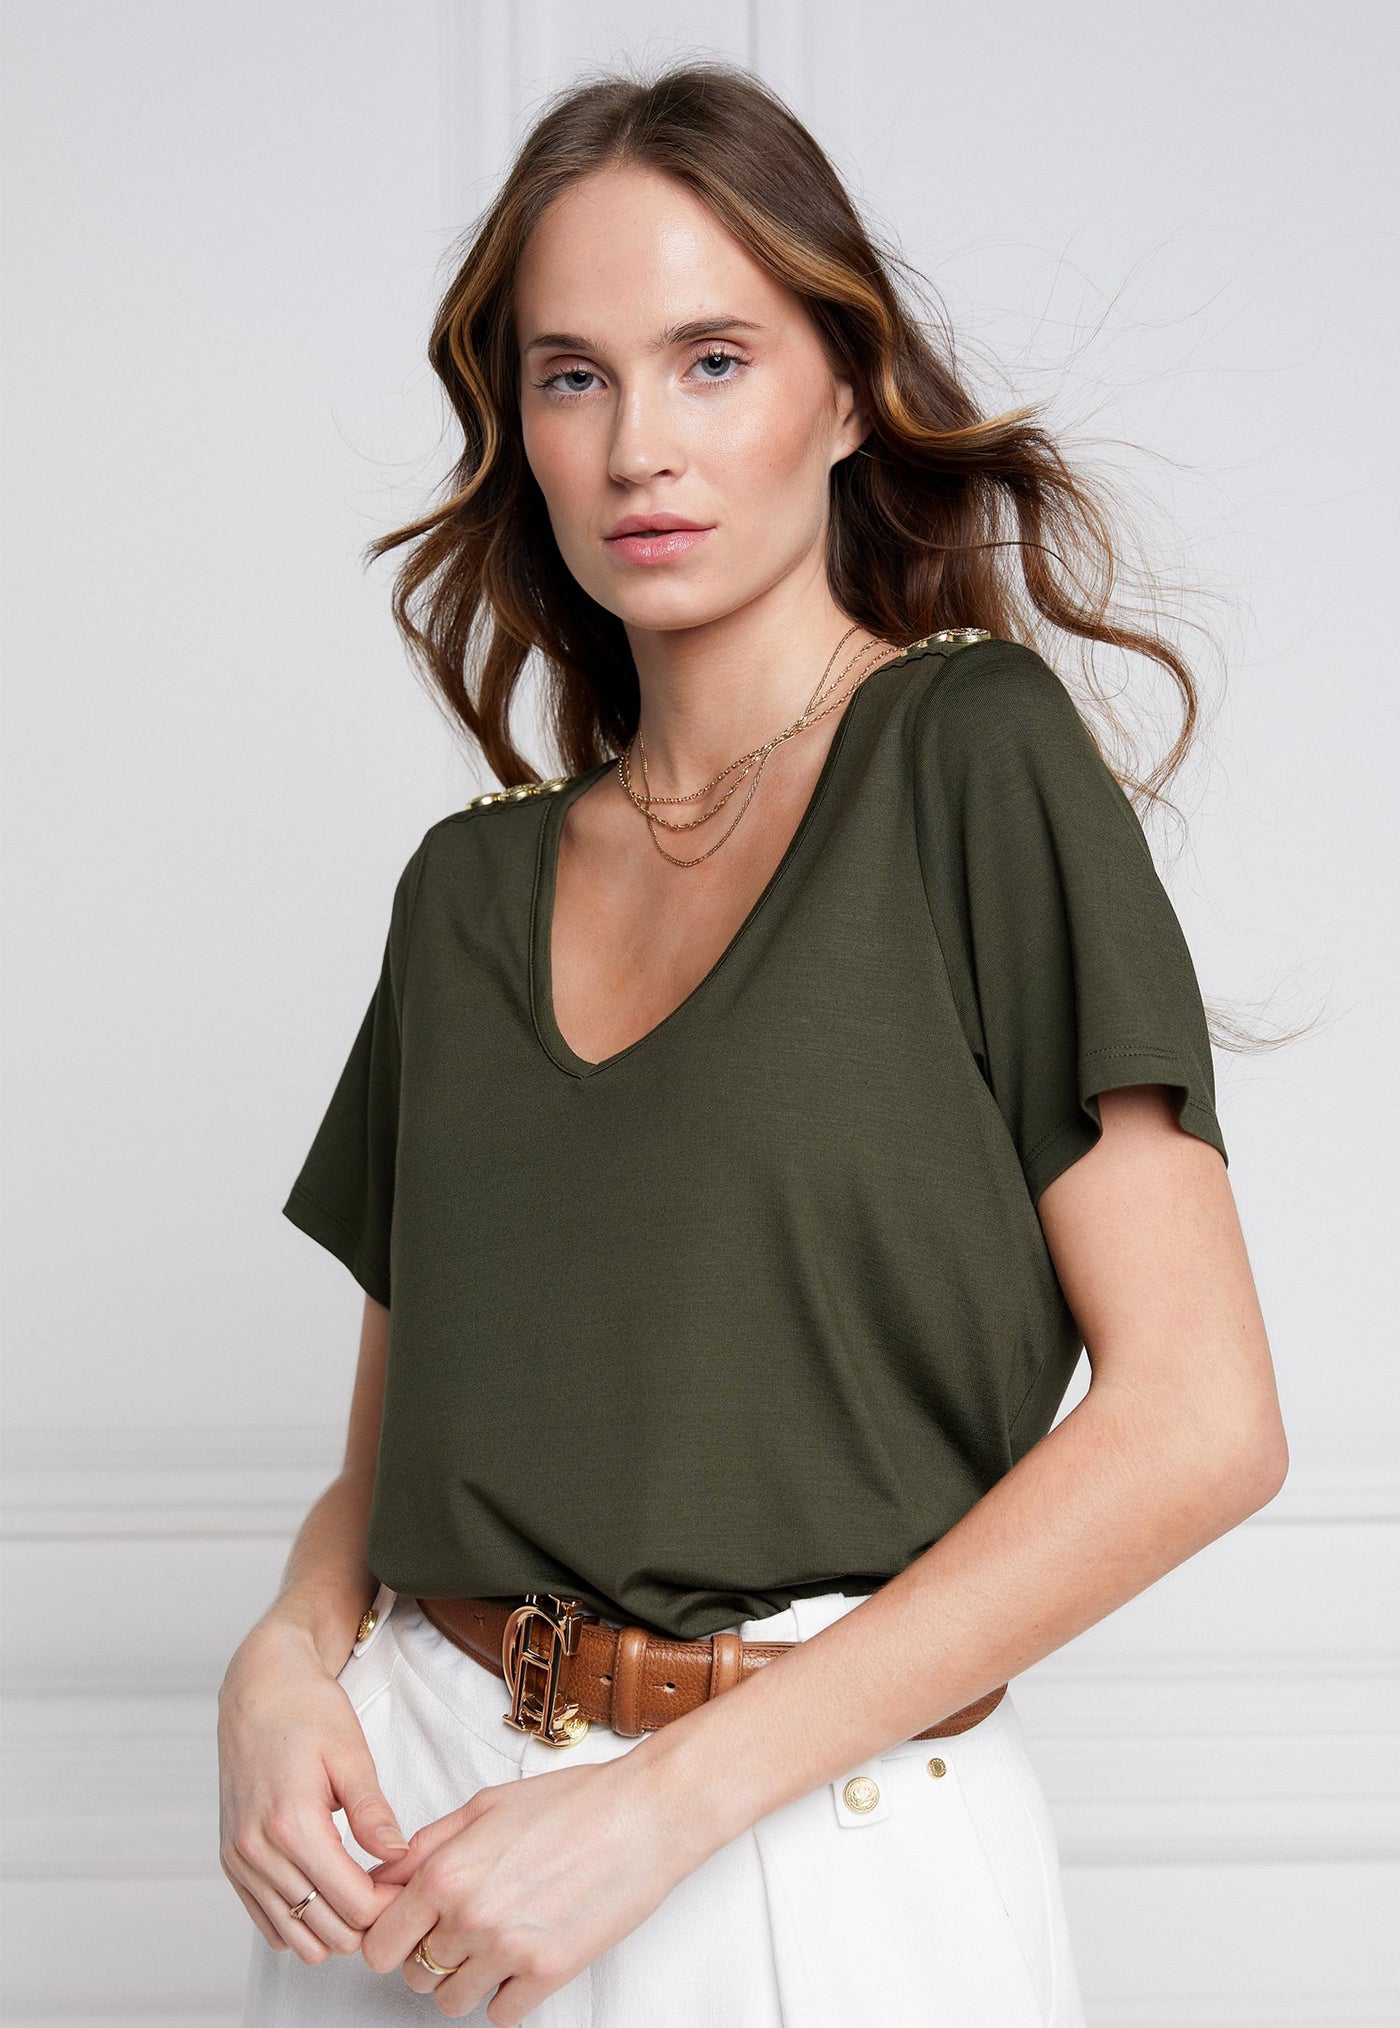 Relaxed Fit V Neck Tee - Khaki sold by Angel Divine